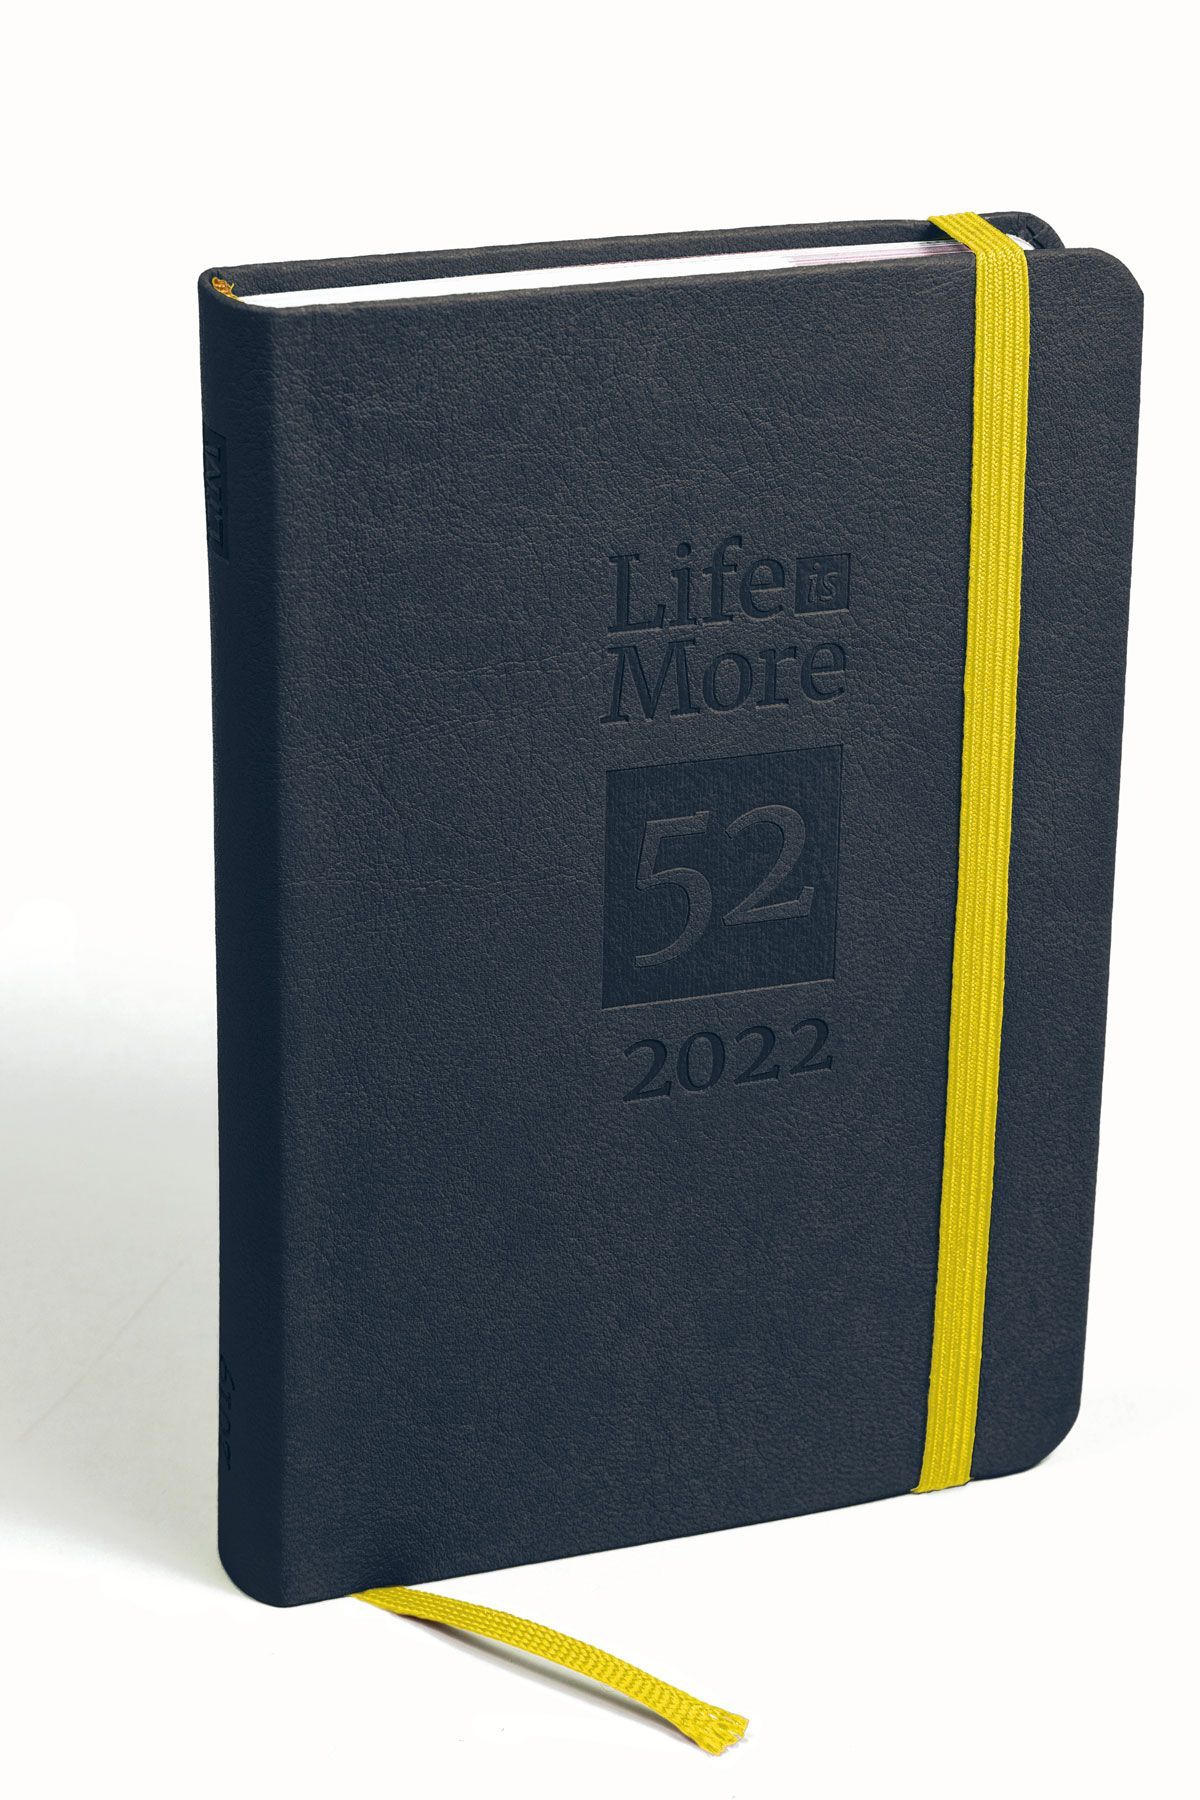 Life is more 52 Andachtsbuch 2022